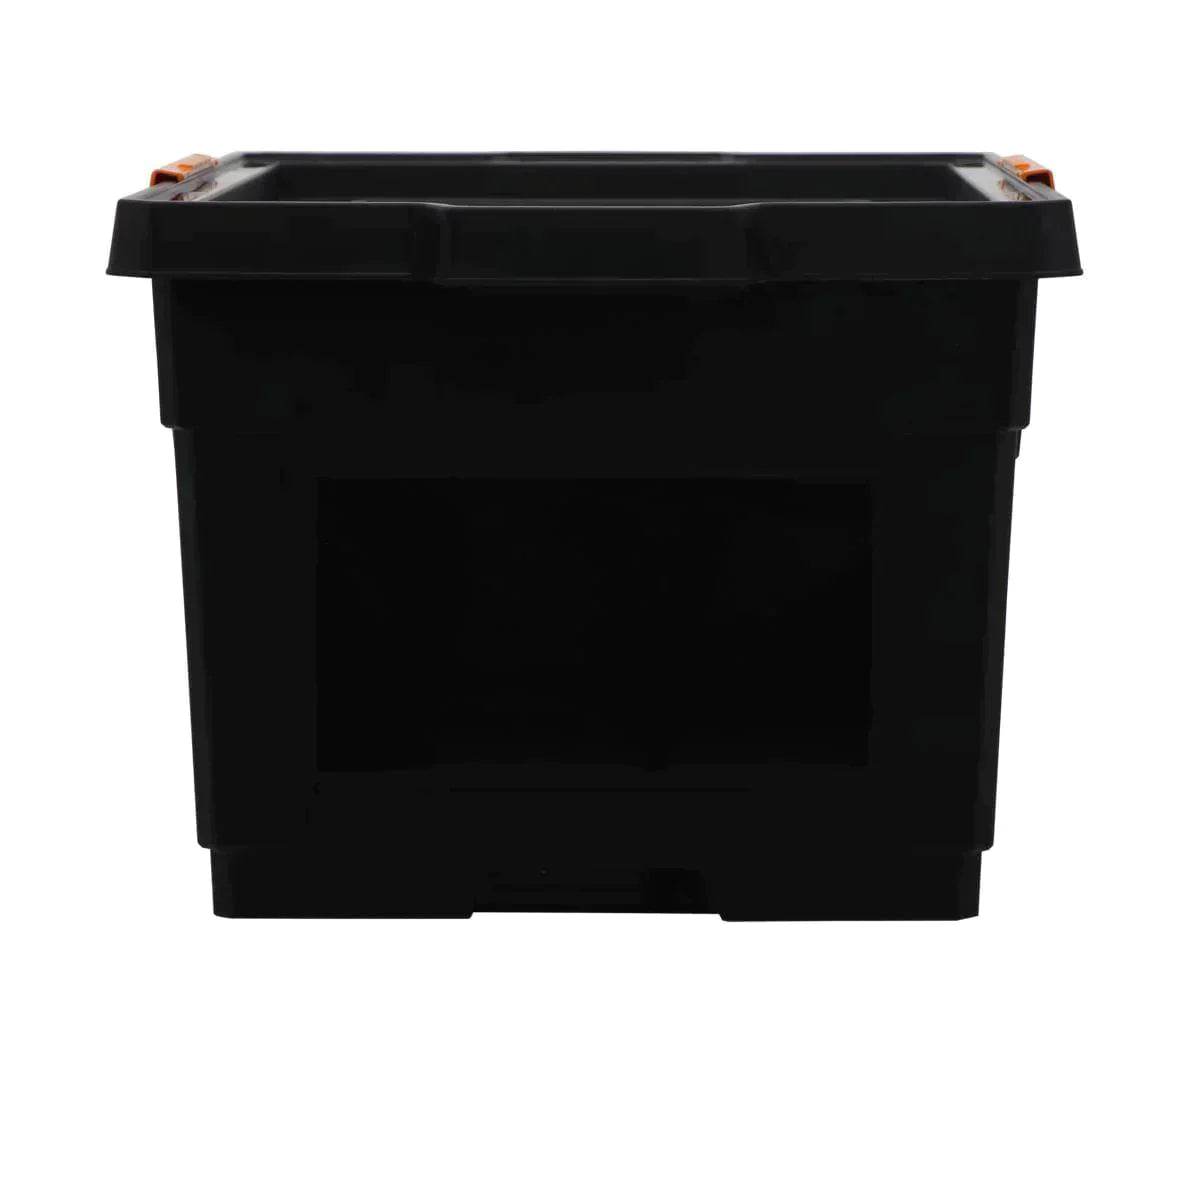 Buy affordable Heavy Duty Organizer Box 40L without Wheels by